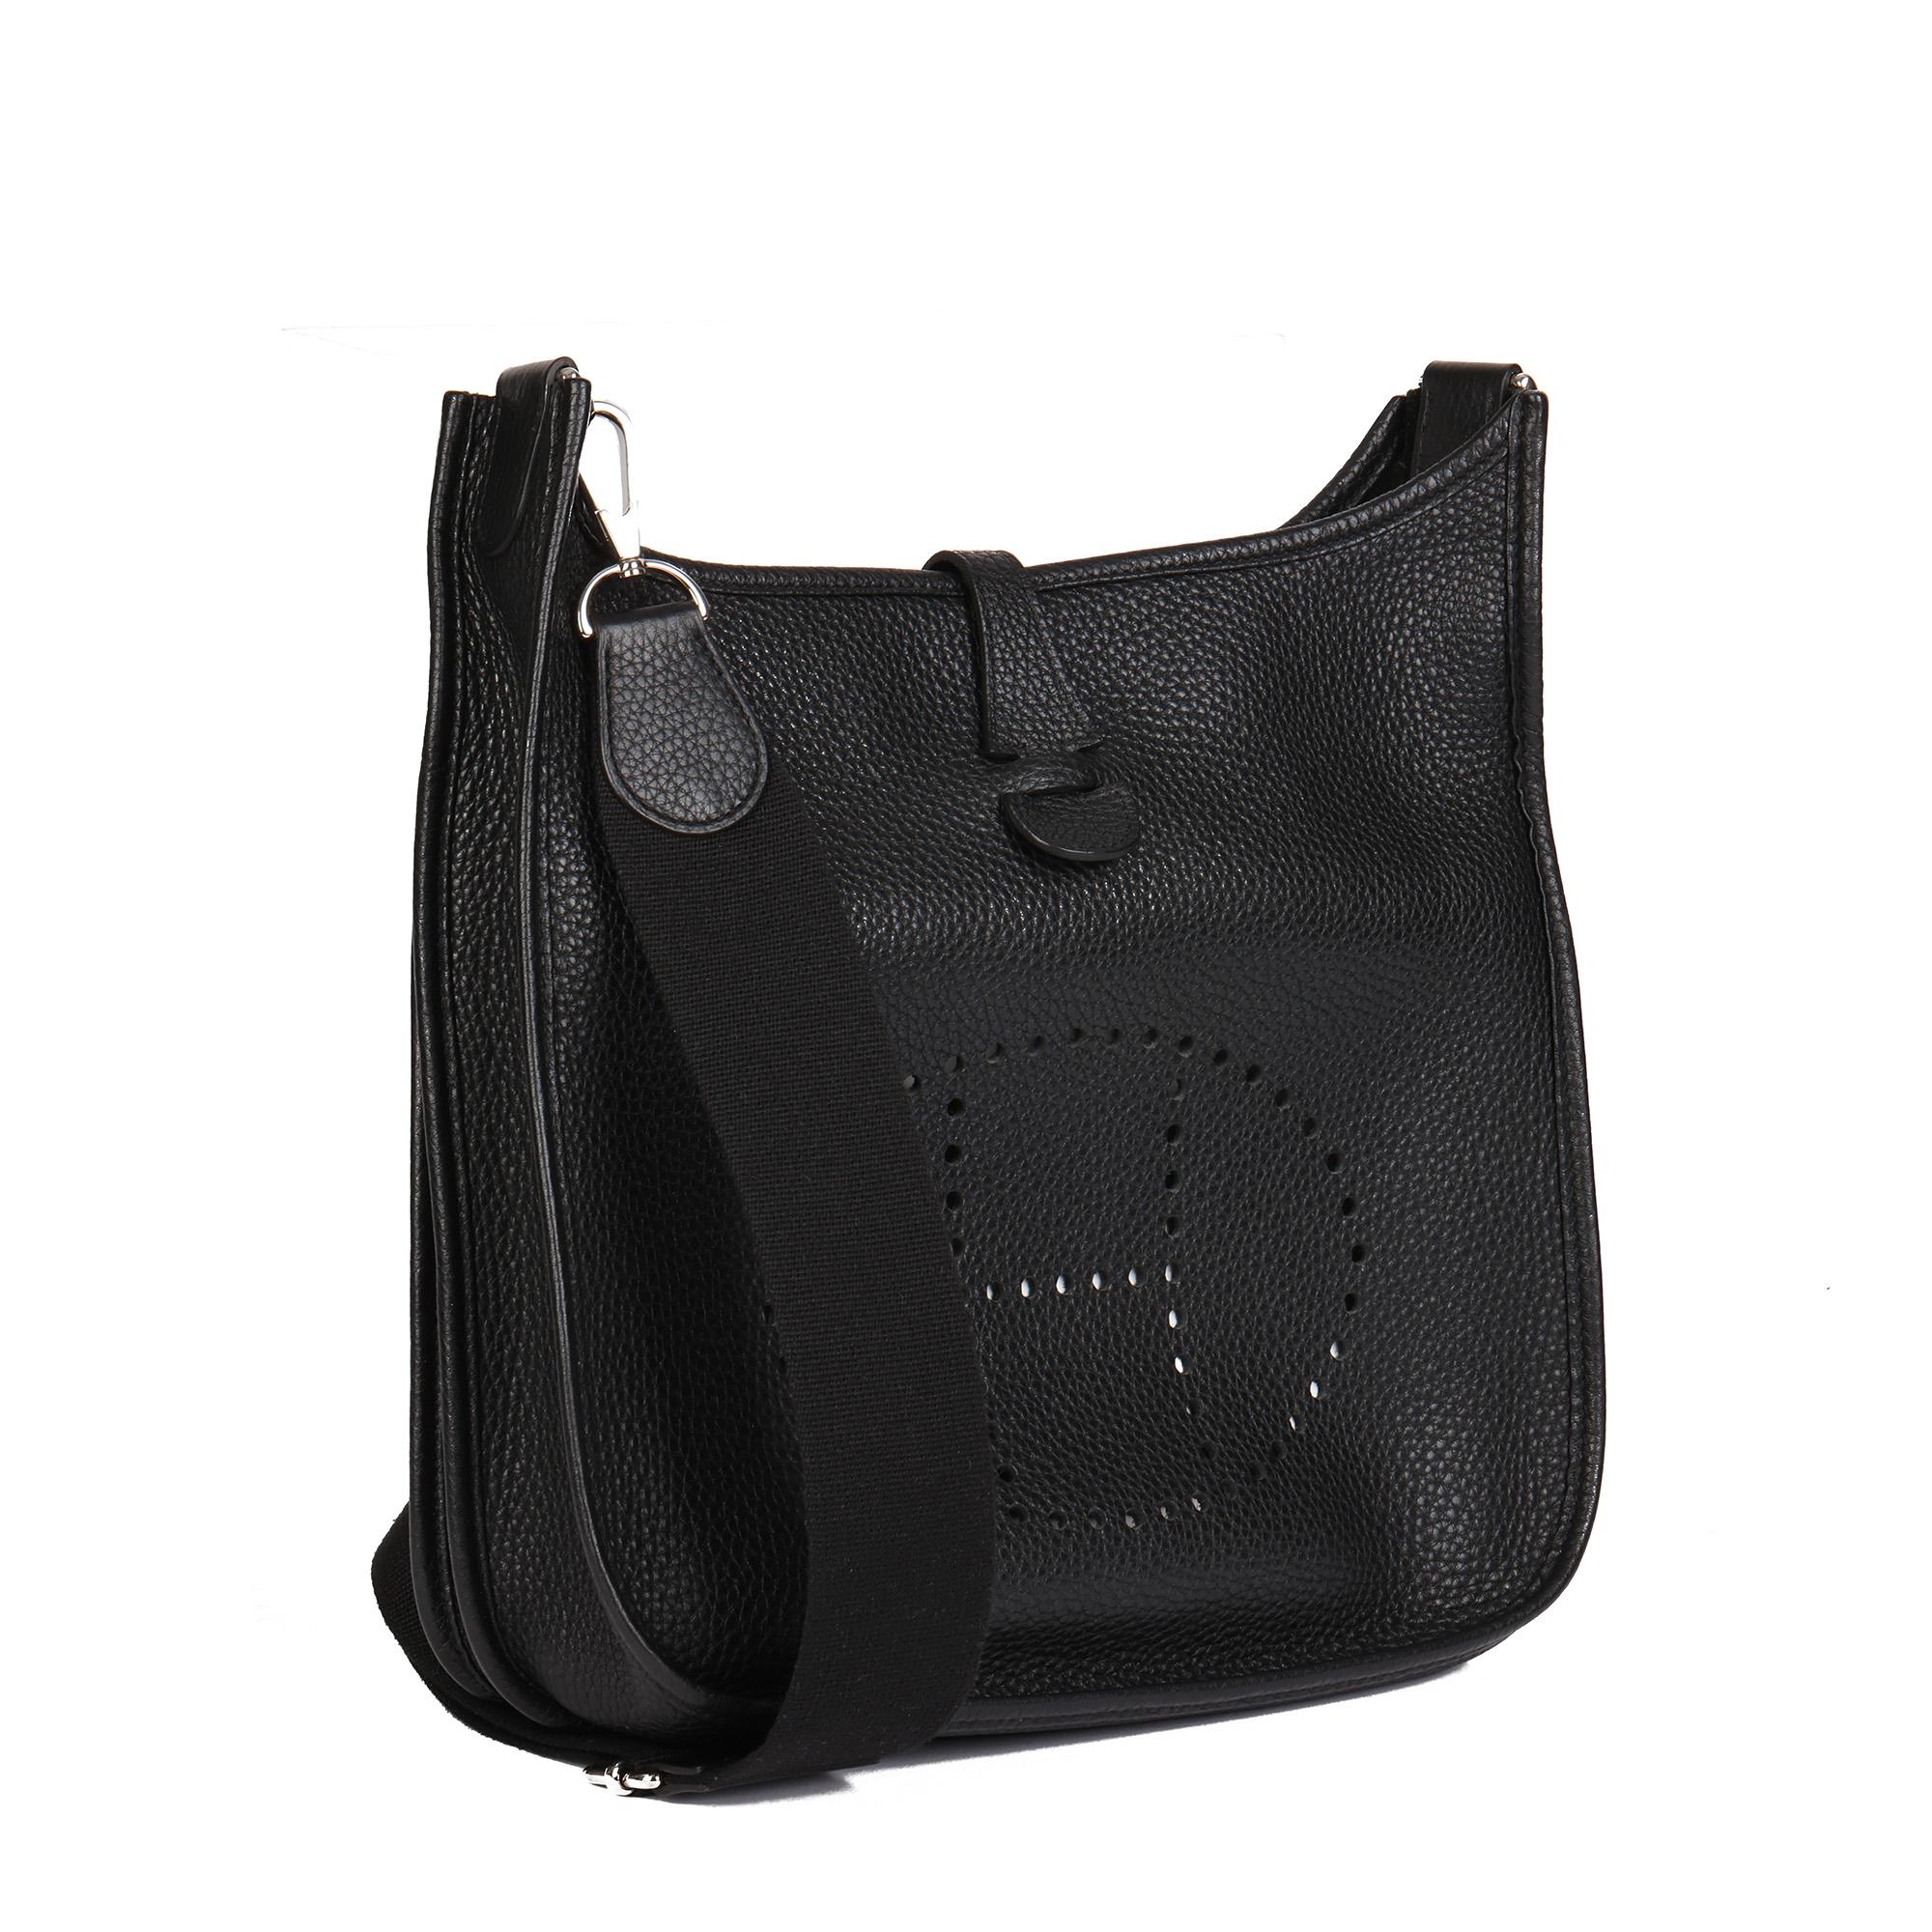 HERMÈS
Black Clemence Leather Evelyne III 29

Xupes Reference: HB4559
Serial Number: T
Age (Circa): 2015
Accompanied By: Hermès Dust Bag, Box, Hermès Receipt, Shoulder Strap
Authenticity Details: Date Stamp (Made in France)
Gender: Ladies
Type: